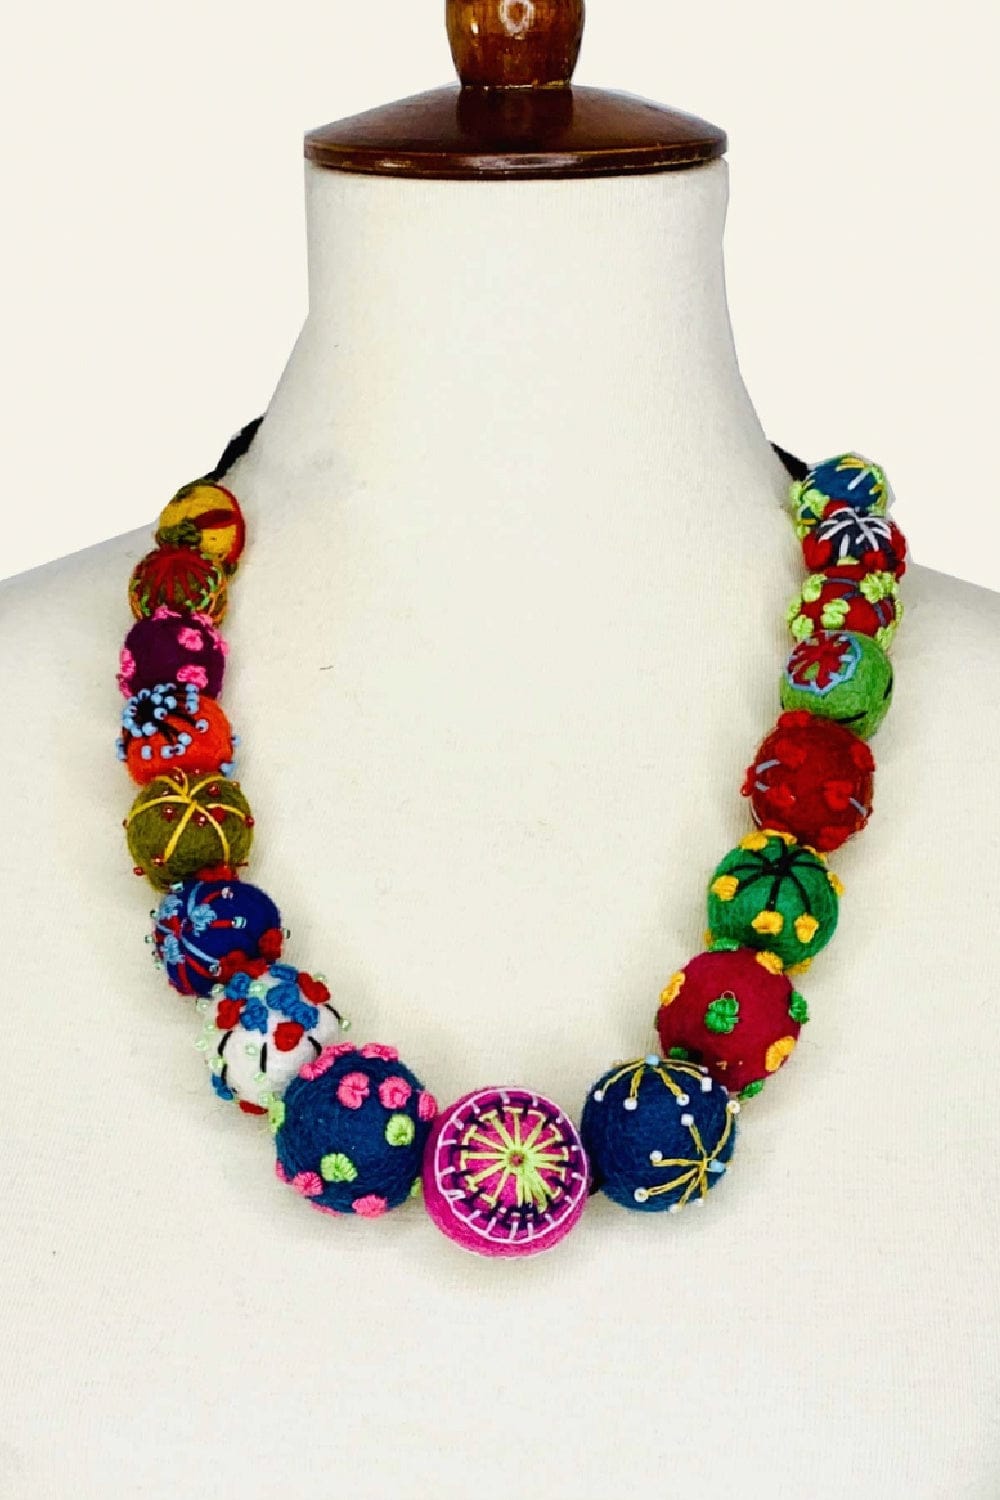 Multi colored felted Necklace made of hand stitched felted balls with stitching detail.